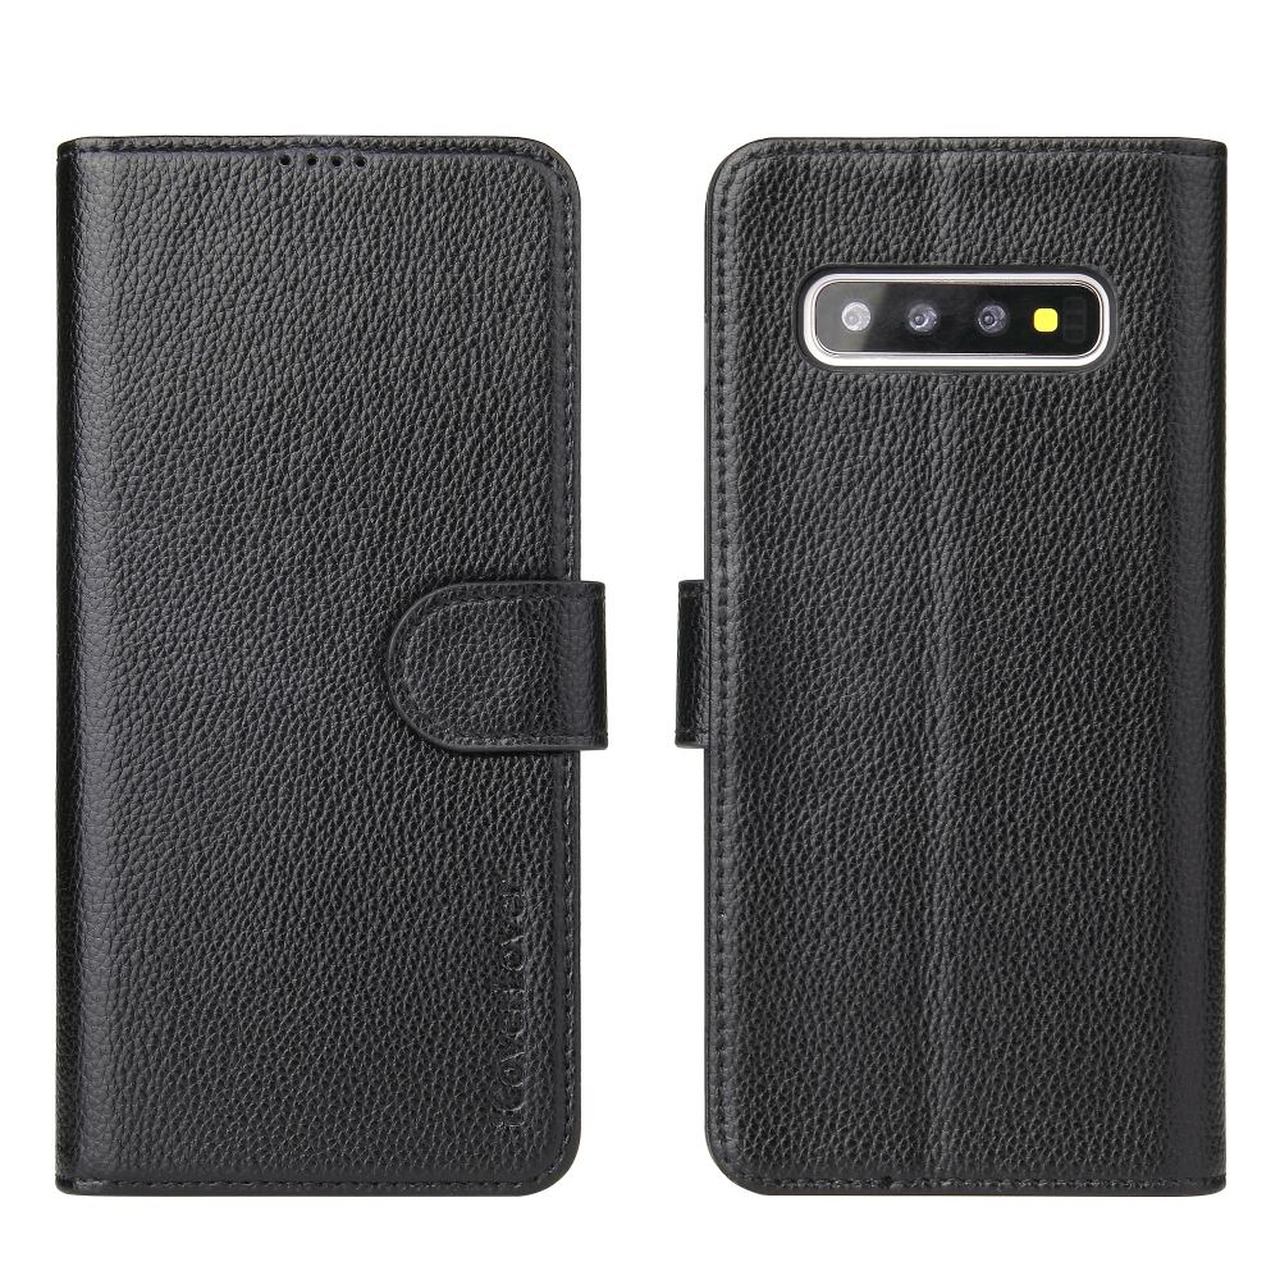 Samsung Galaxy S10+ PLUS Case Black iCoverLover Genuine Cow Leather Wallet,3 Card 1 Cash Slot,Magnetic Flap & Kickstand